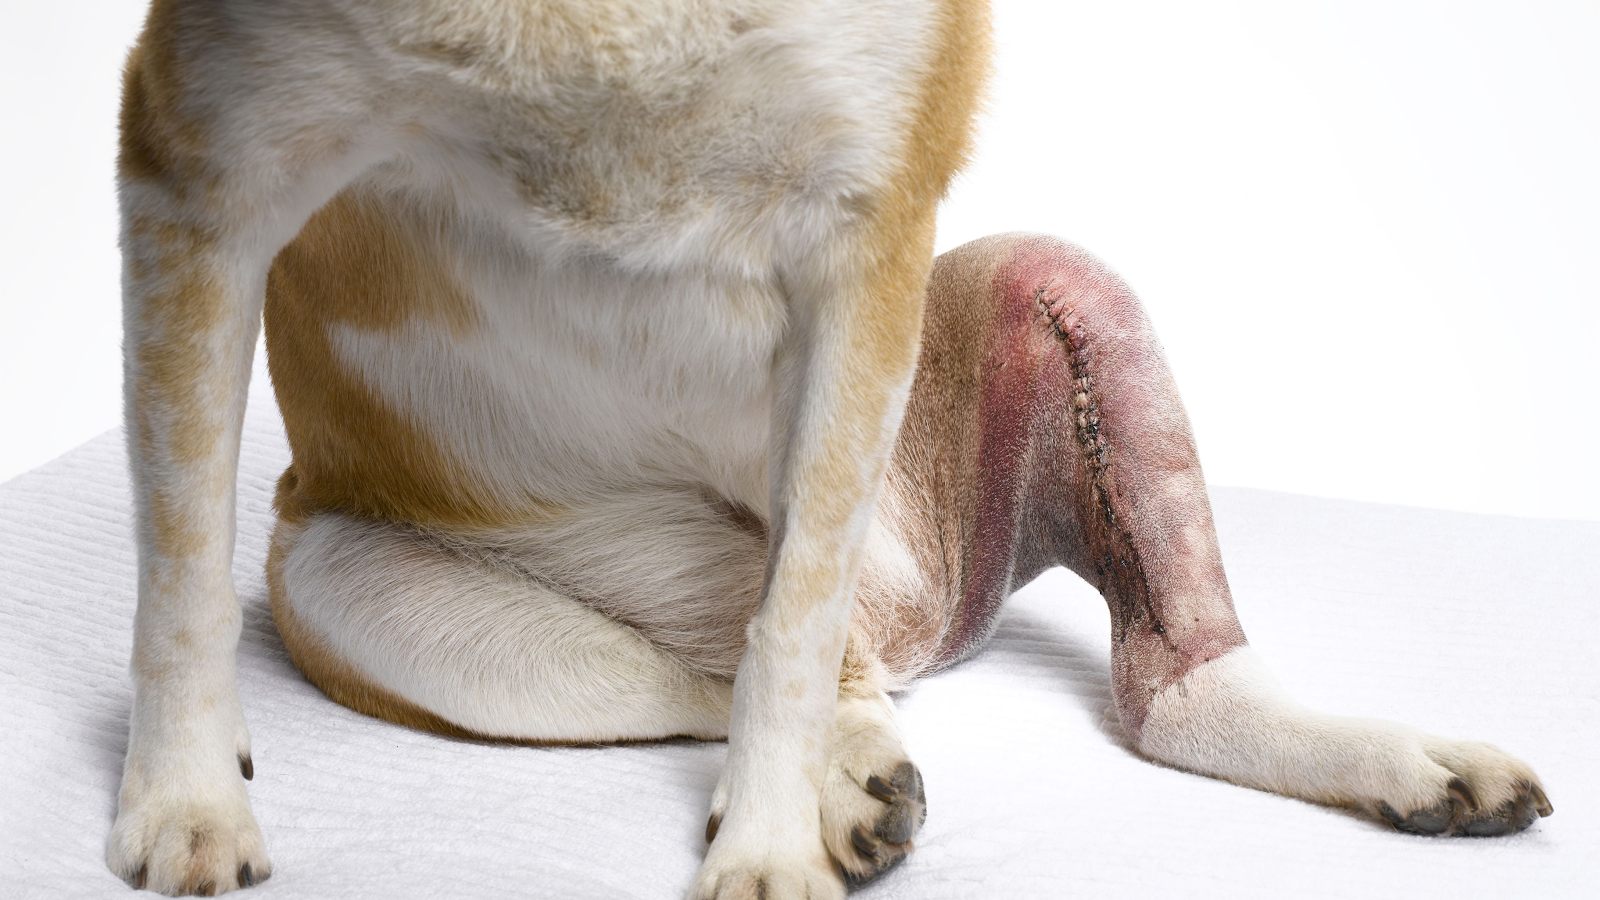 A Step-By-Step Guide To Orthopedic Dog’s Surgery